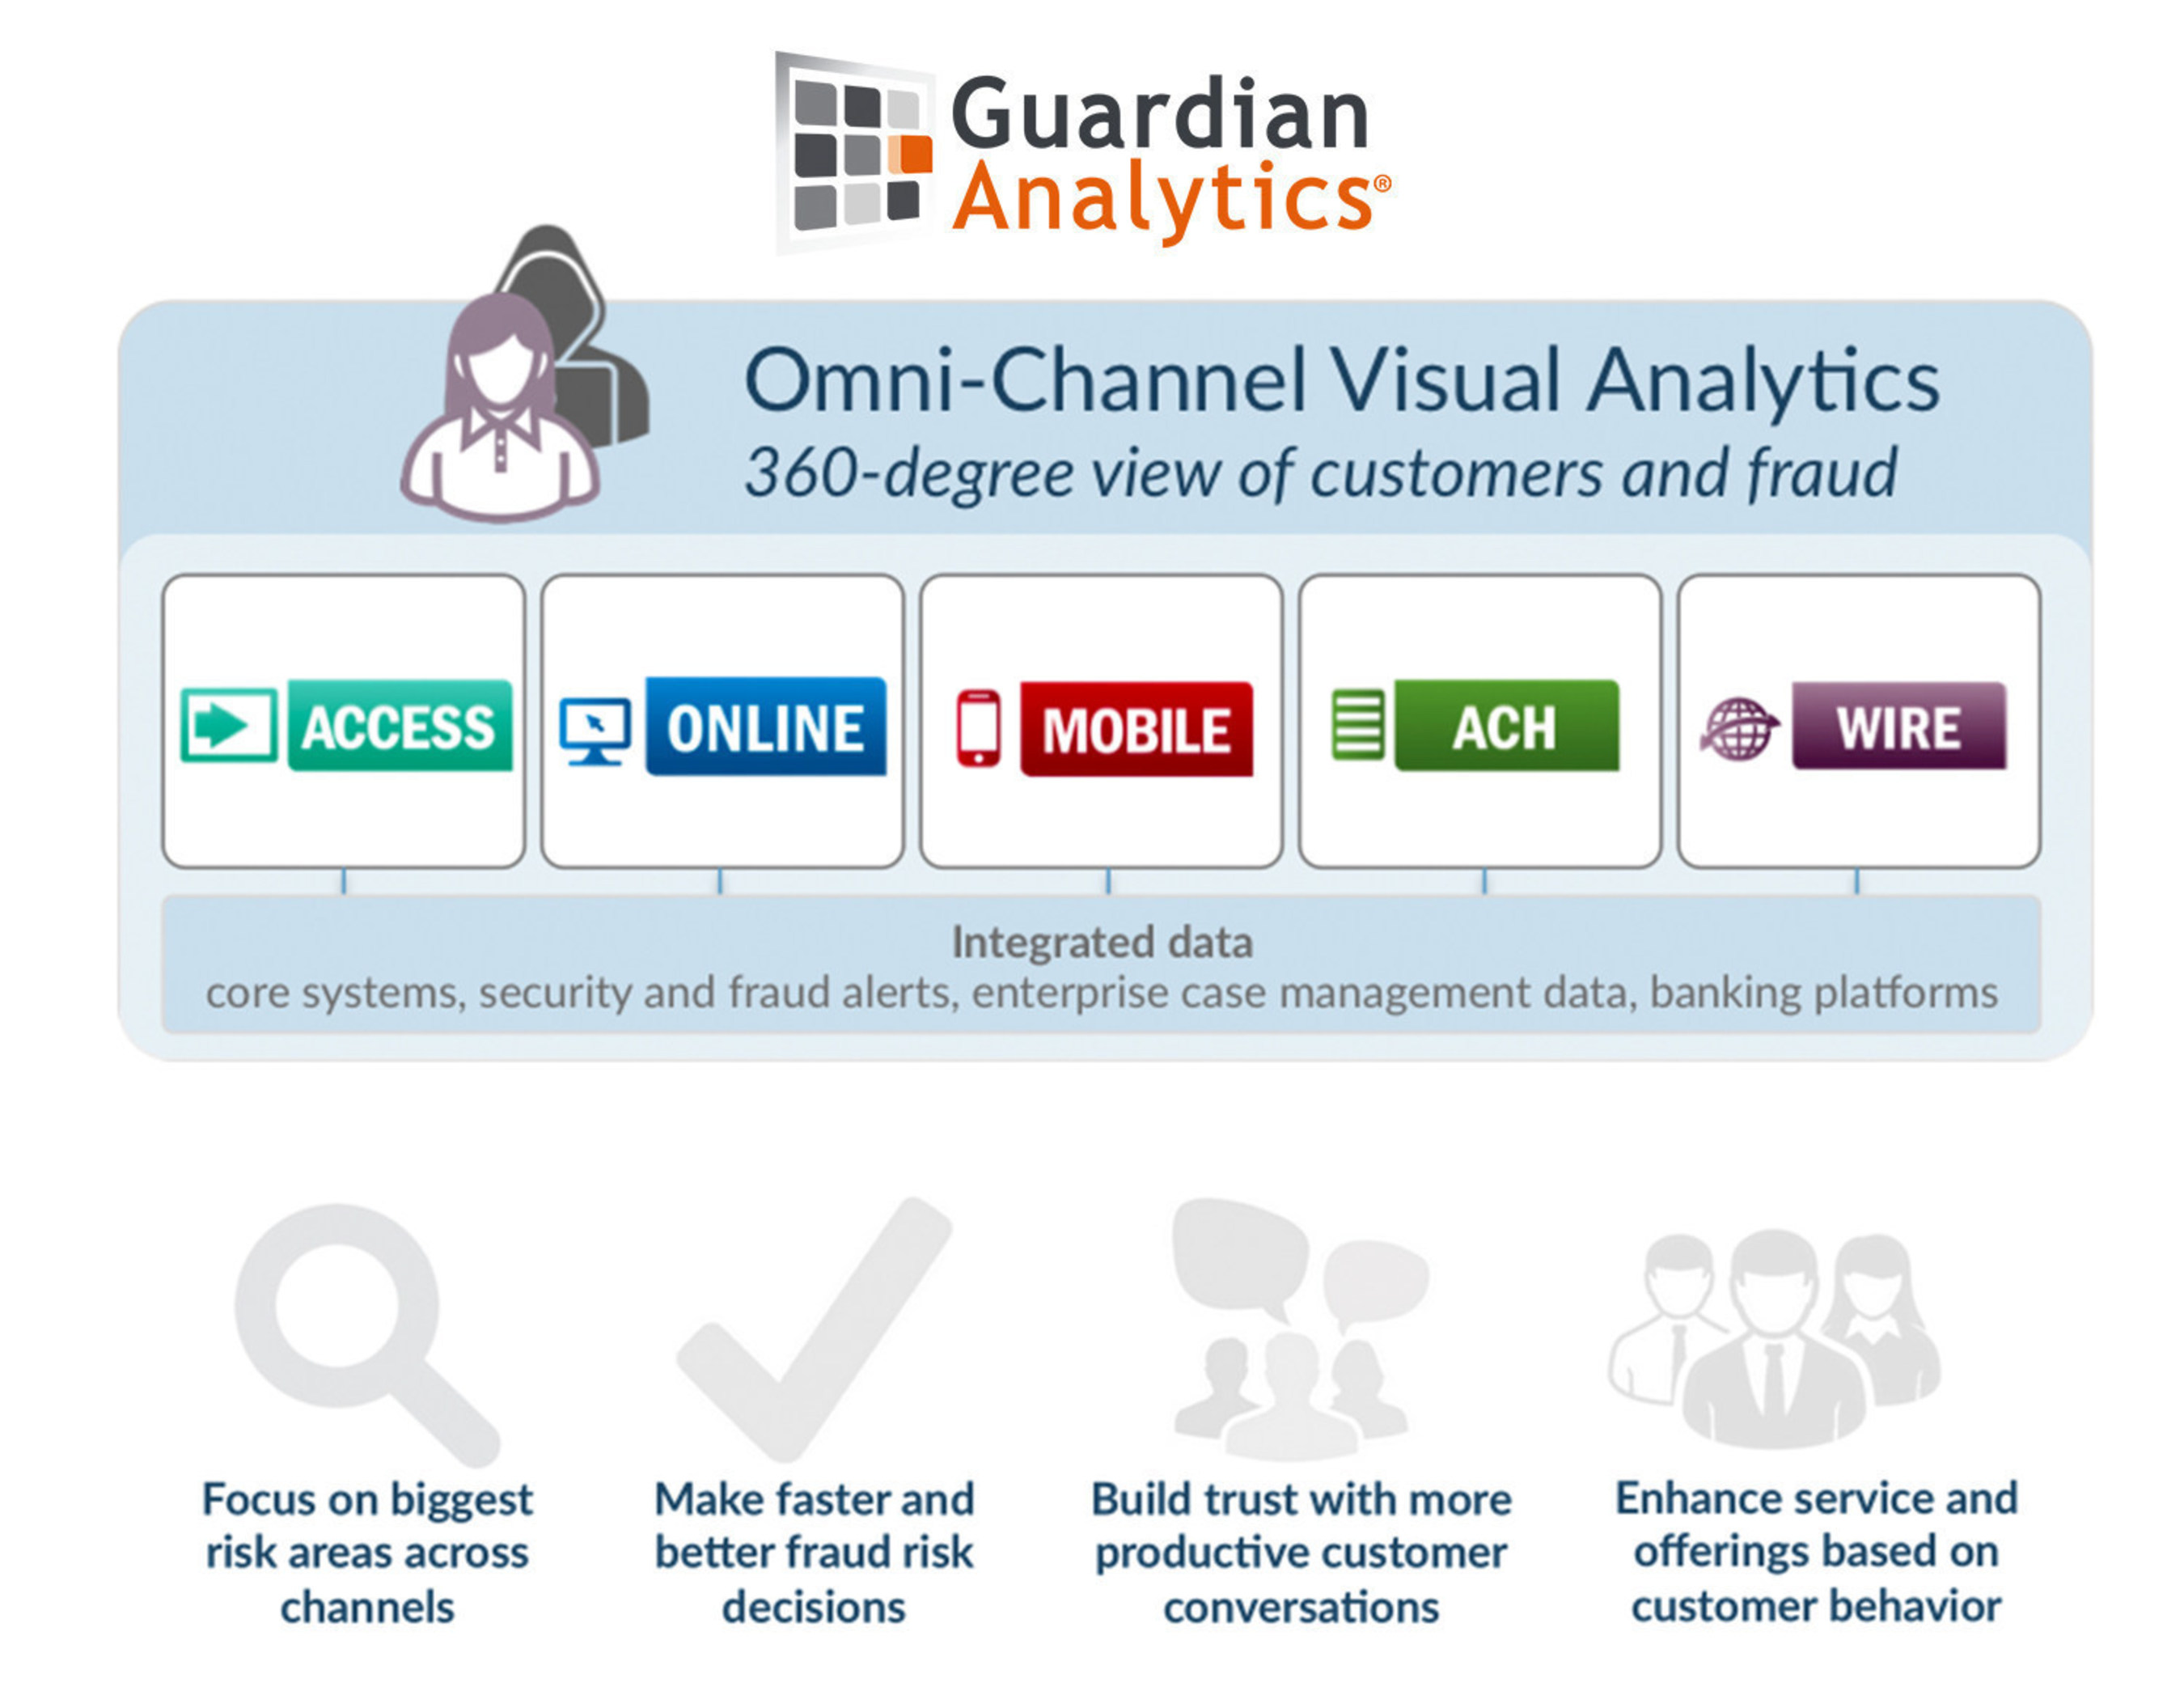 Make faster and better fraud risk decisions with Guardian Analytics' Omni-Channel Fraud Prevention